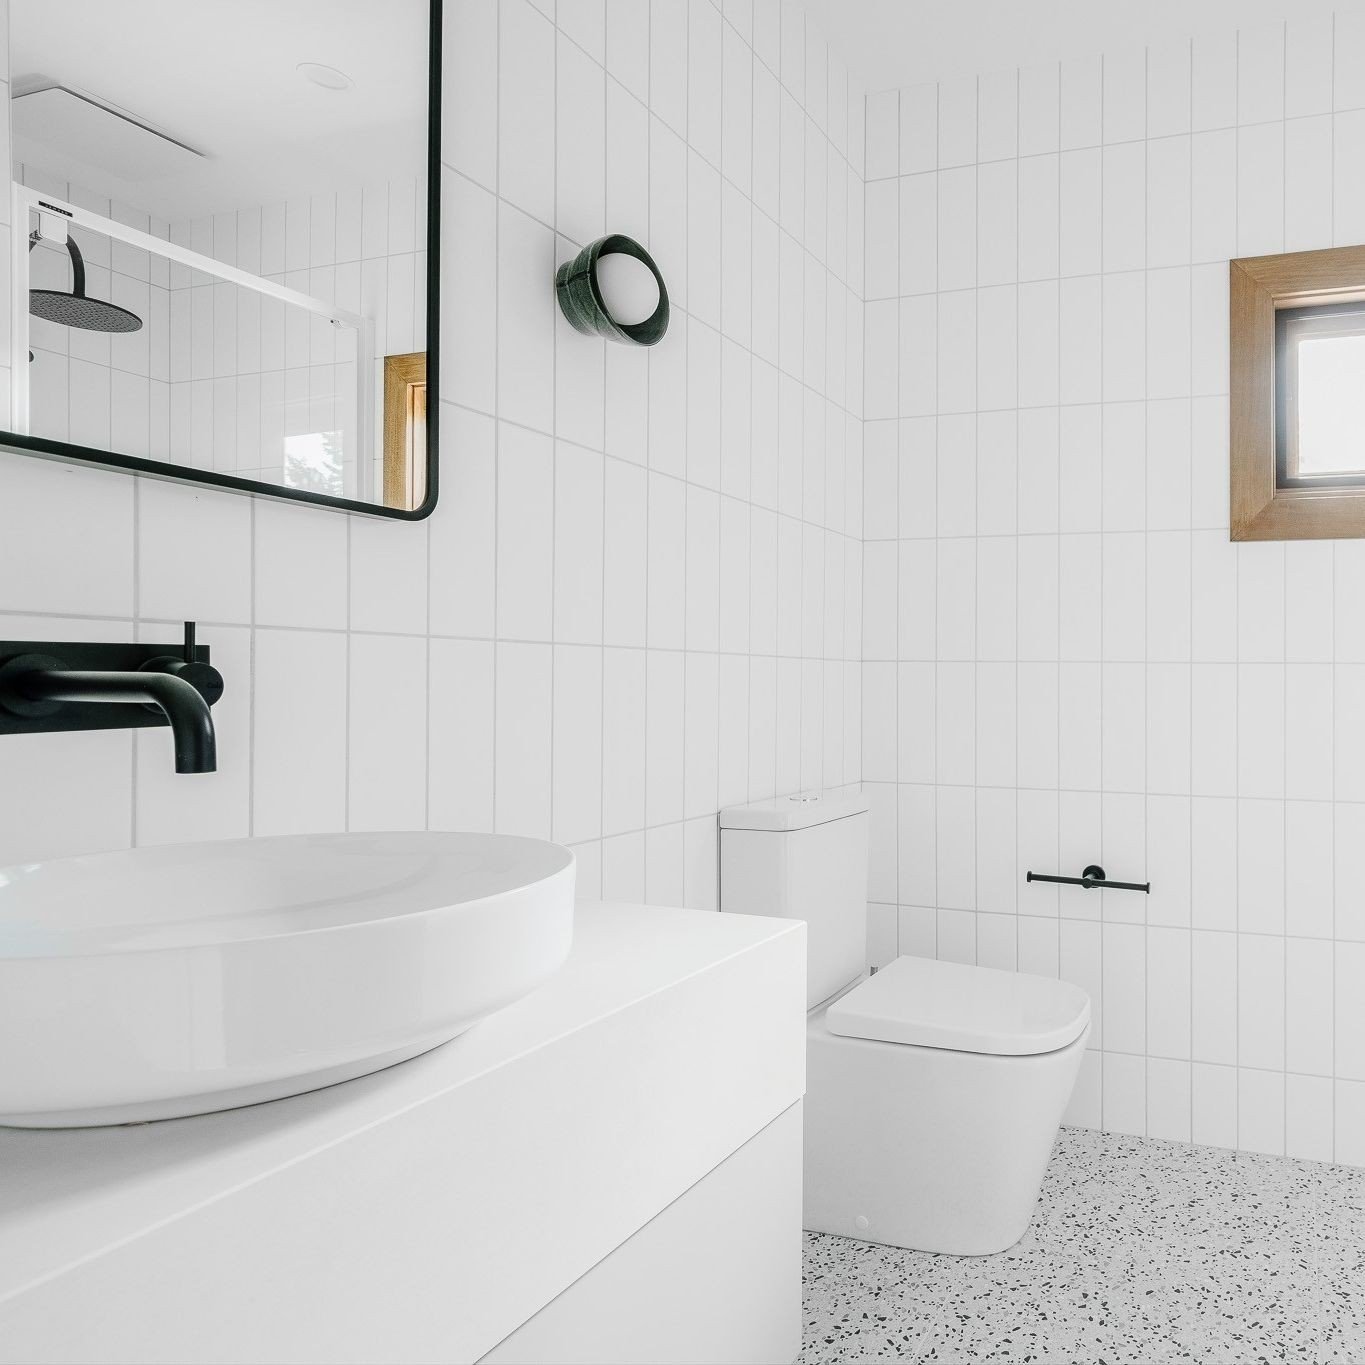 Before, during and after - the upstairs bathroom at The Residence was previously a 70s stunner. The transformation involved splitting the previous large and wasted space into two bathrooms, refreshing the materials with simple white wall tiles, and a